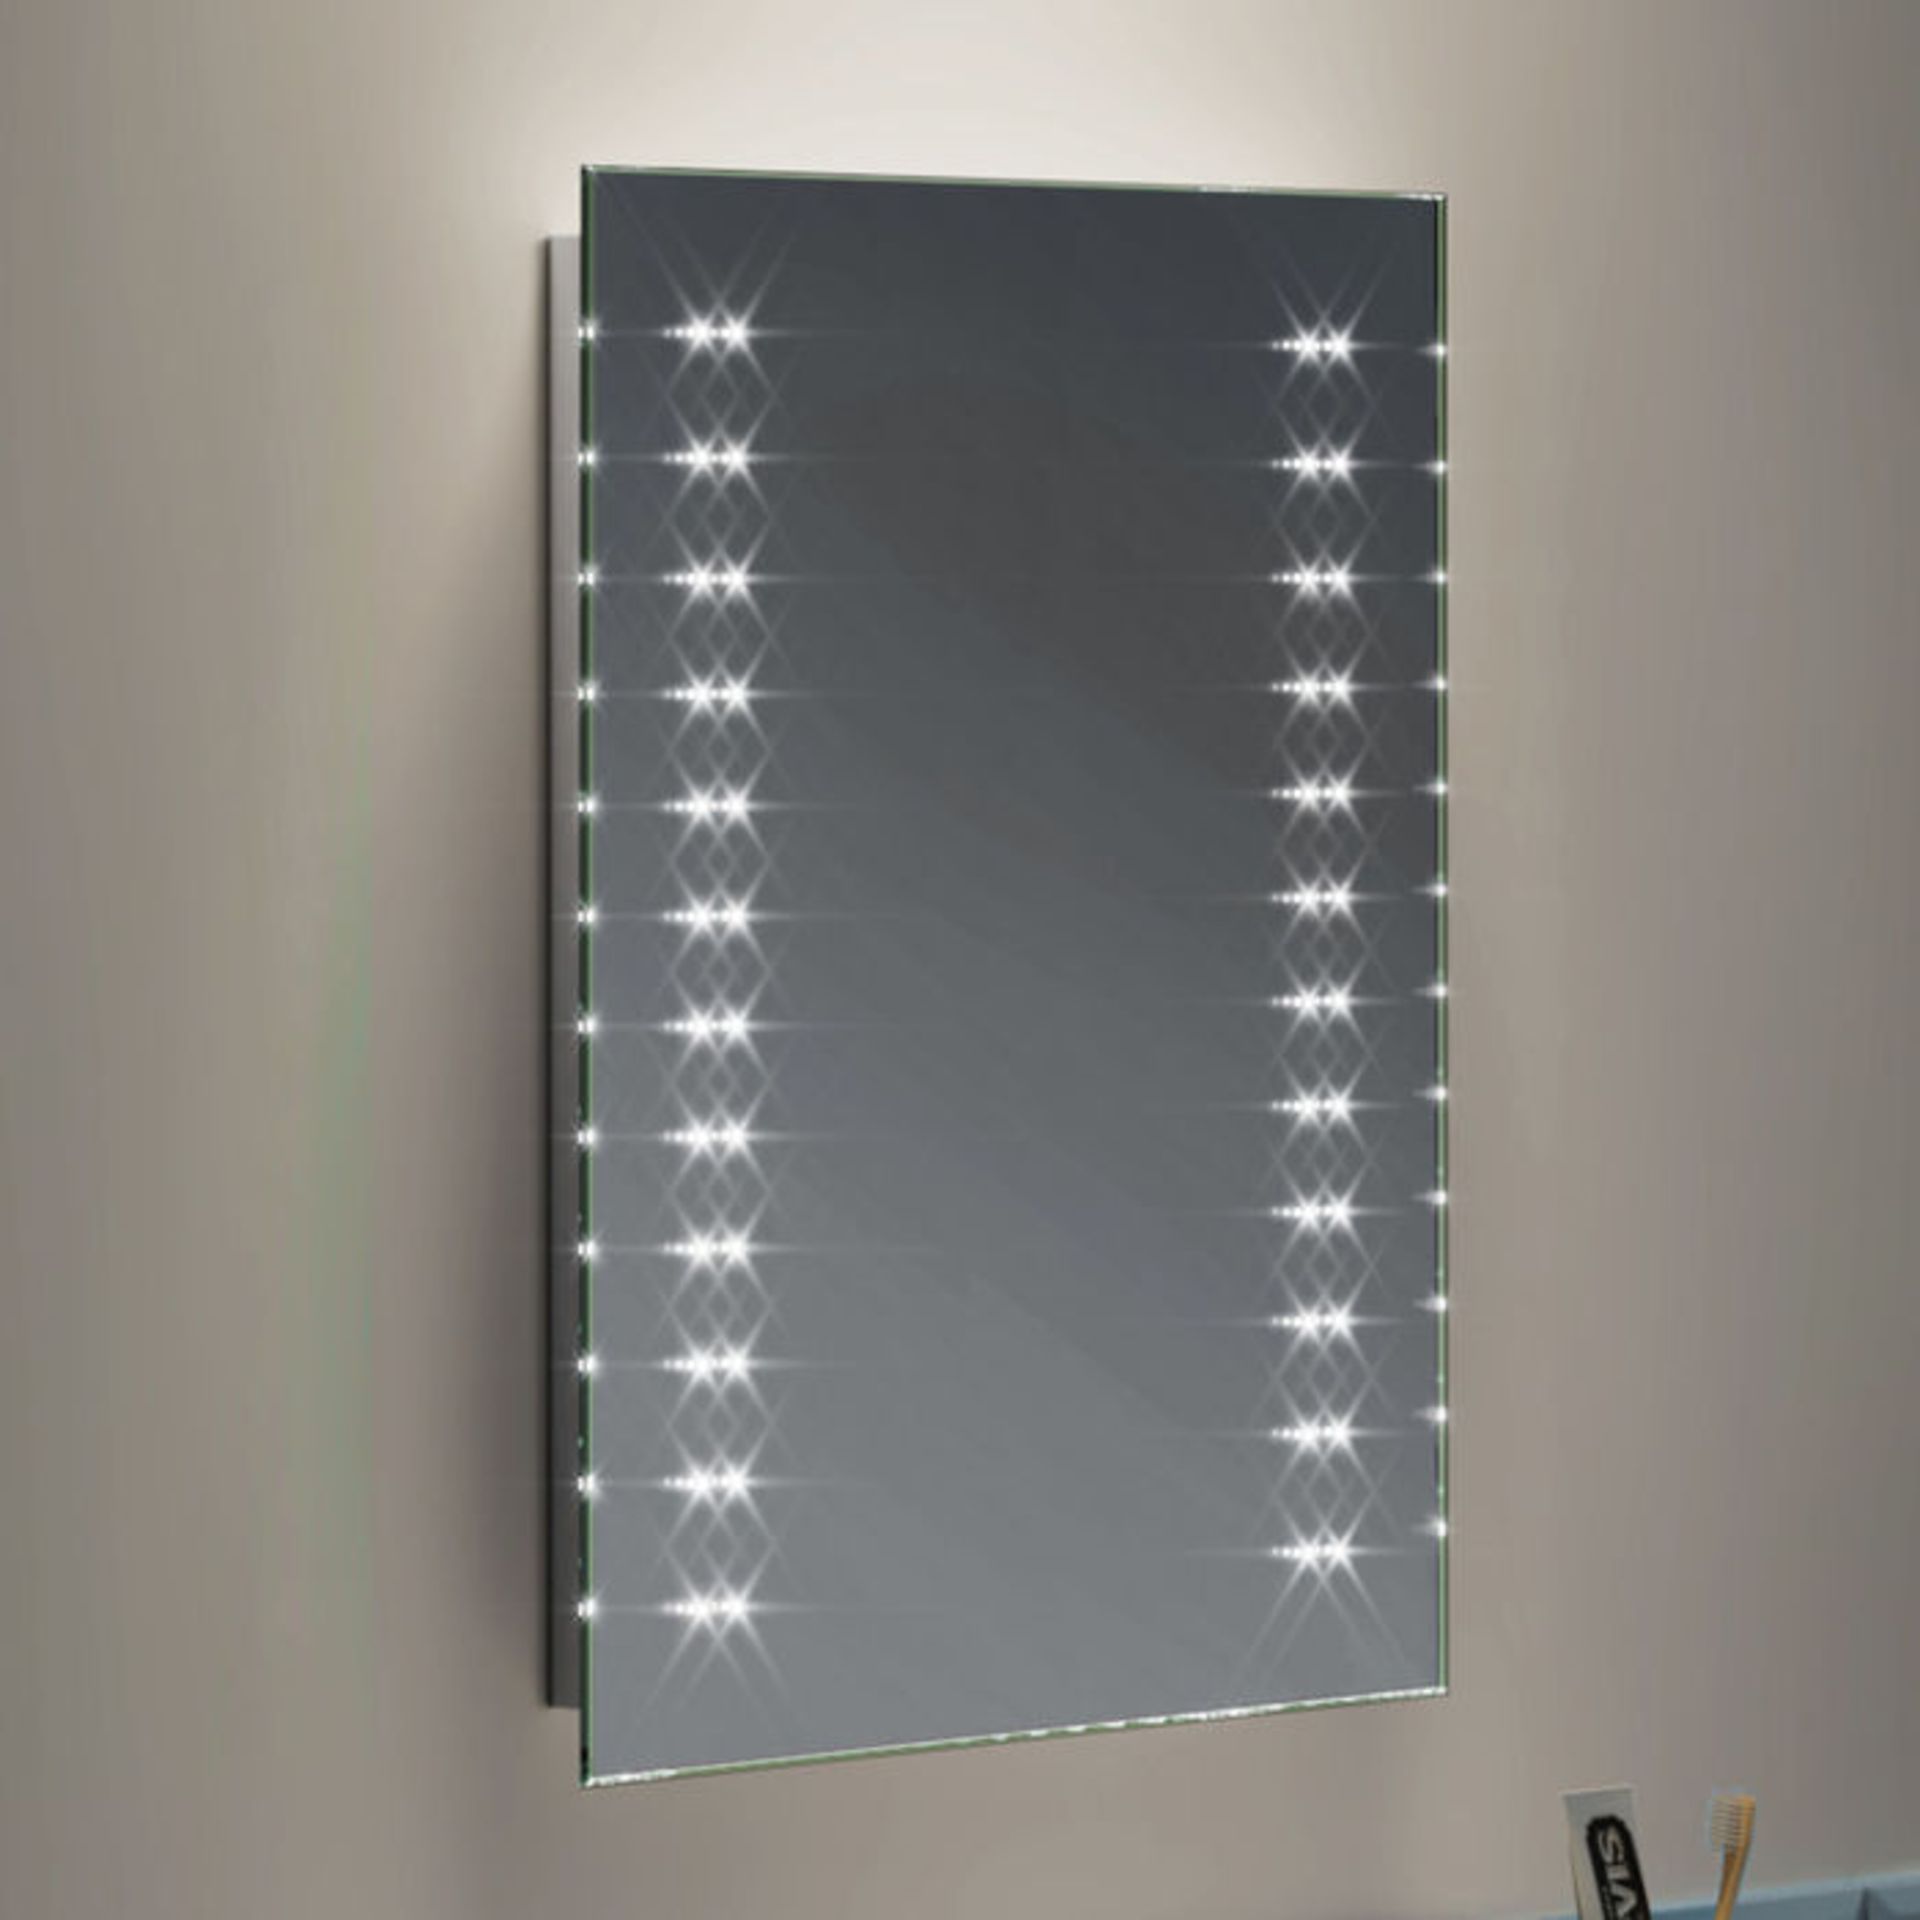 (HS118) 500x390mm Galactic Illuminated LED Mirror - Battery Operated. Energy saving controlled